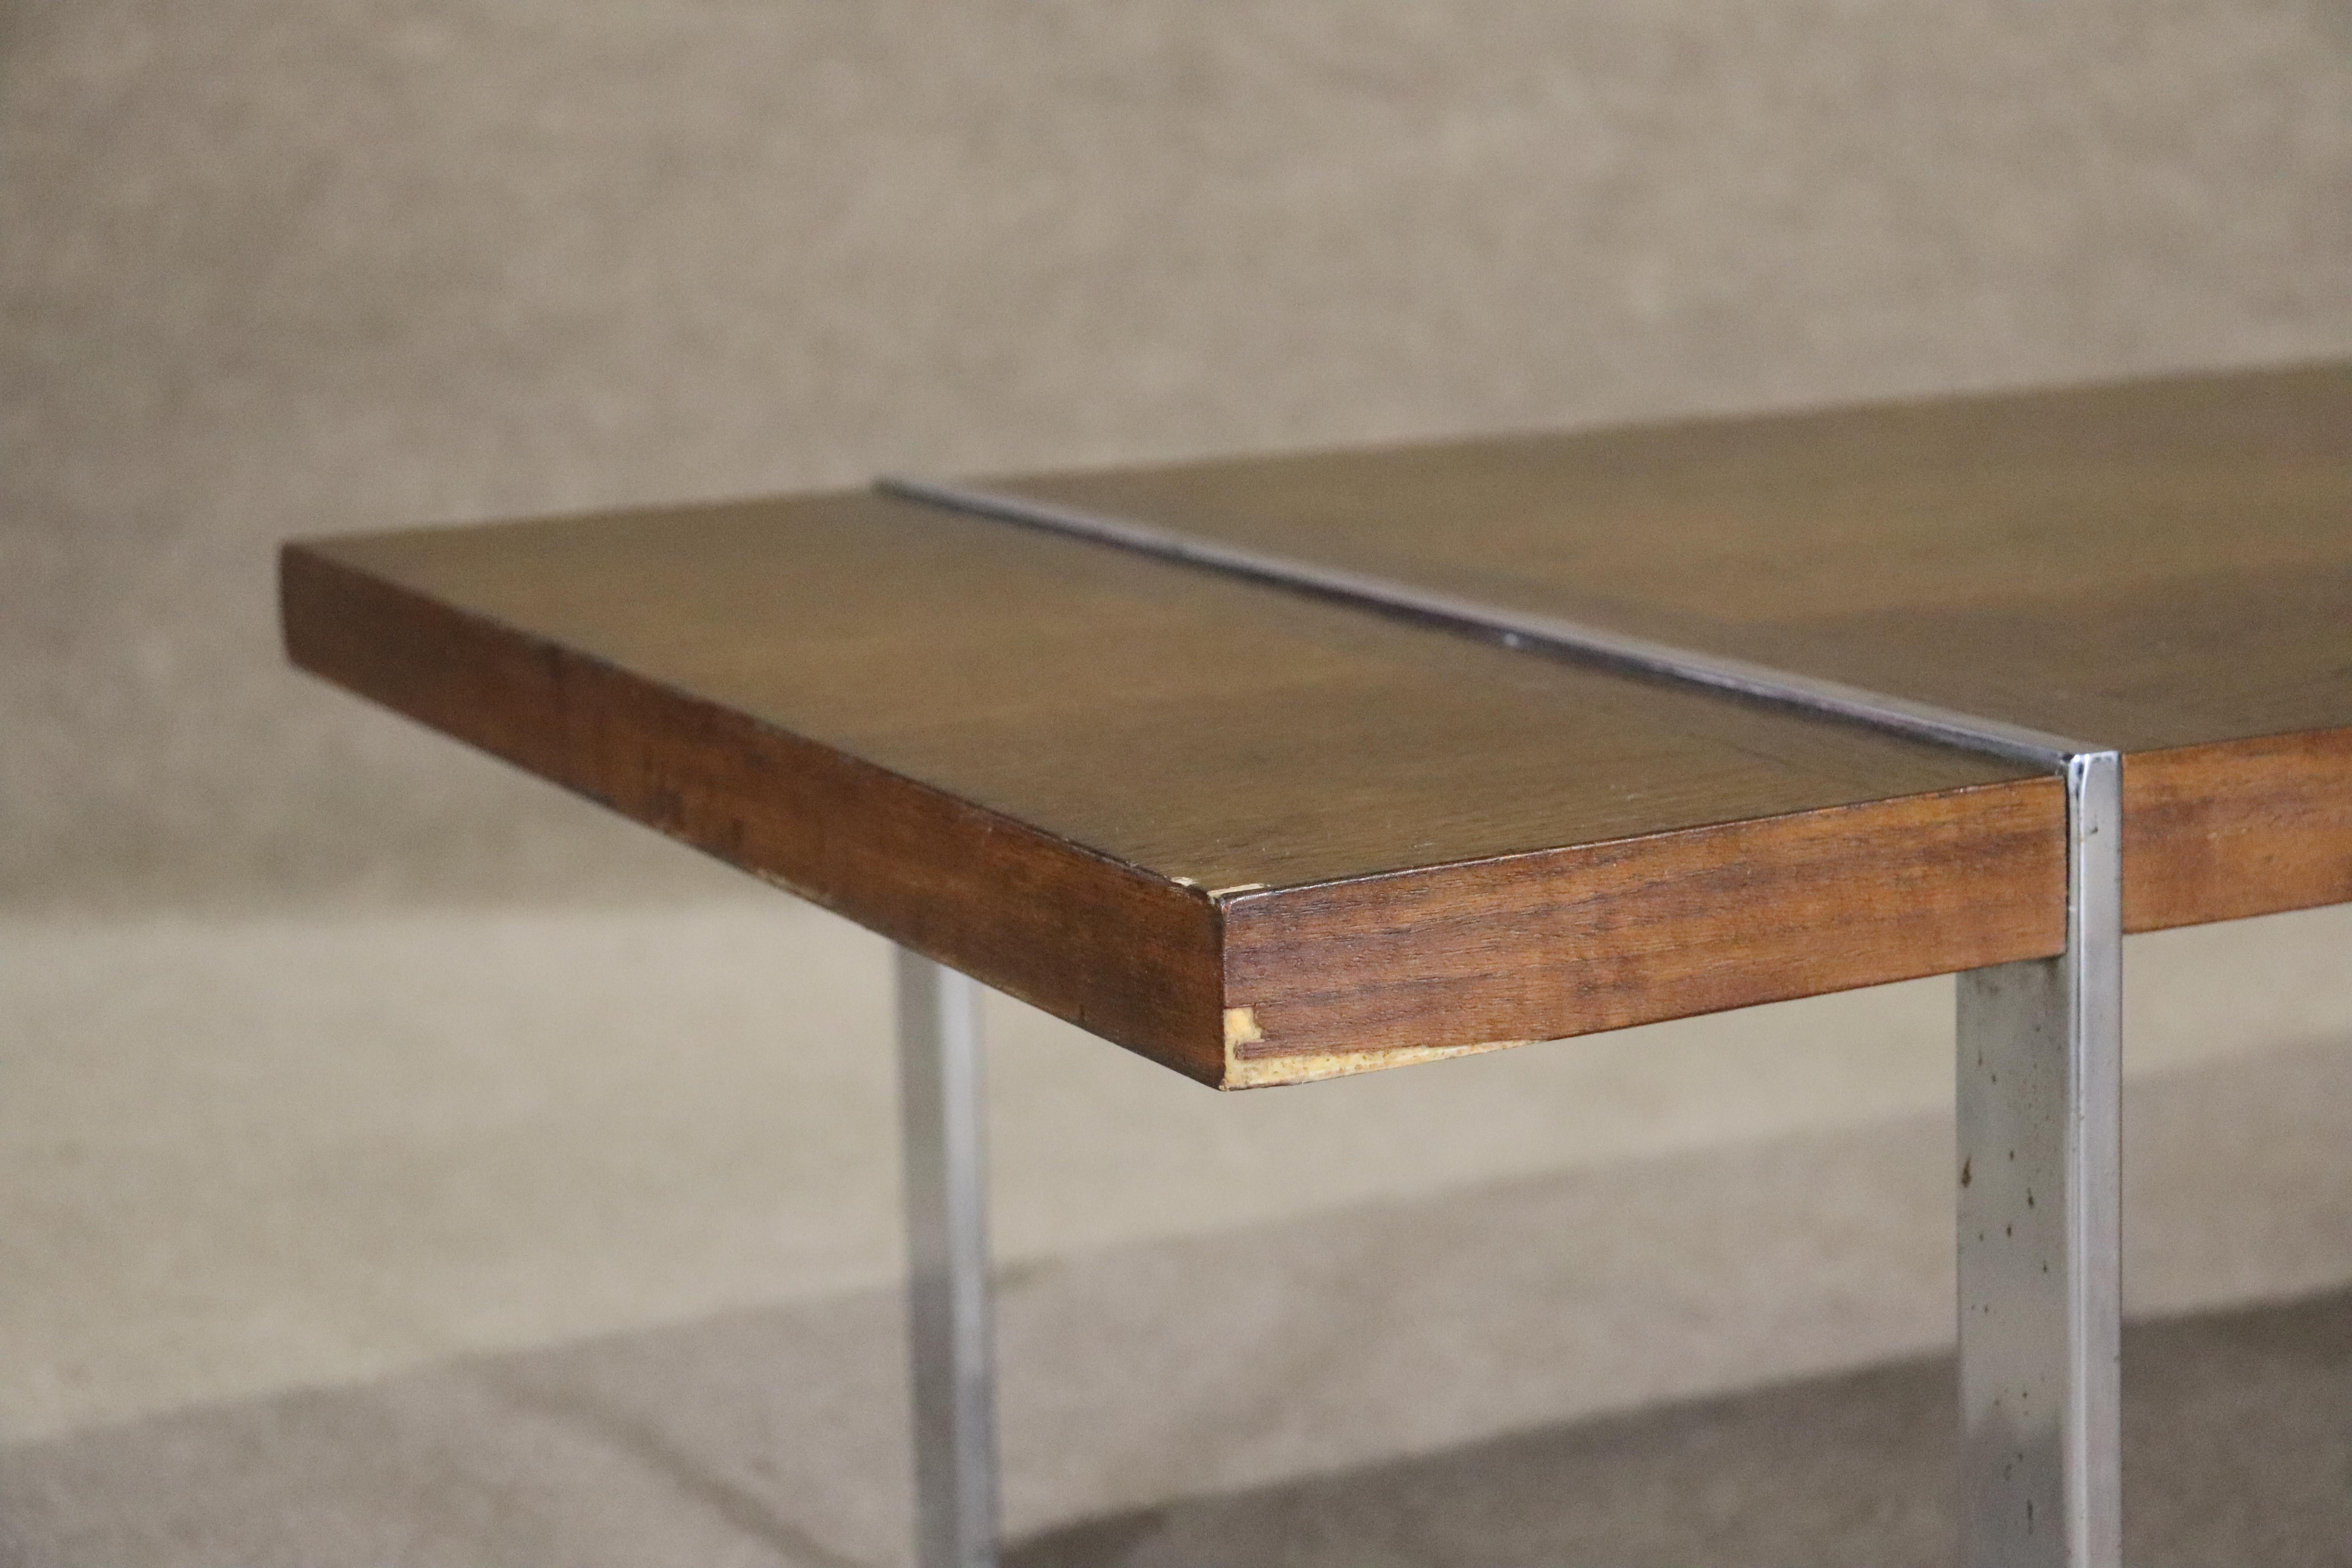 This simple and handsome mid-century modern table by Lane Furniture has warm walnut grain with contrasting rosewood strips, and polished chrome legs exposed in the table top.
Please confirm location NY or NJ